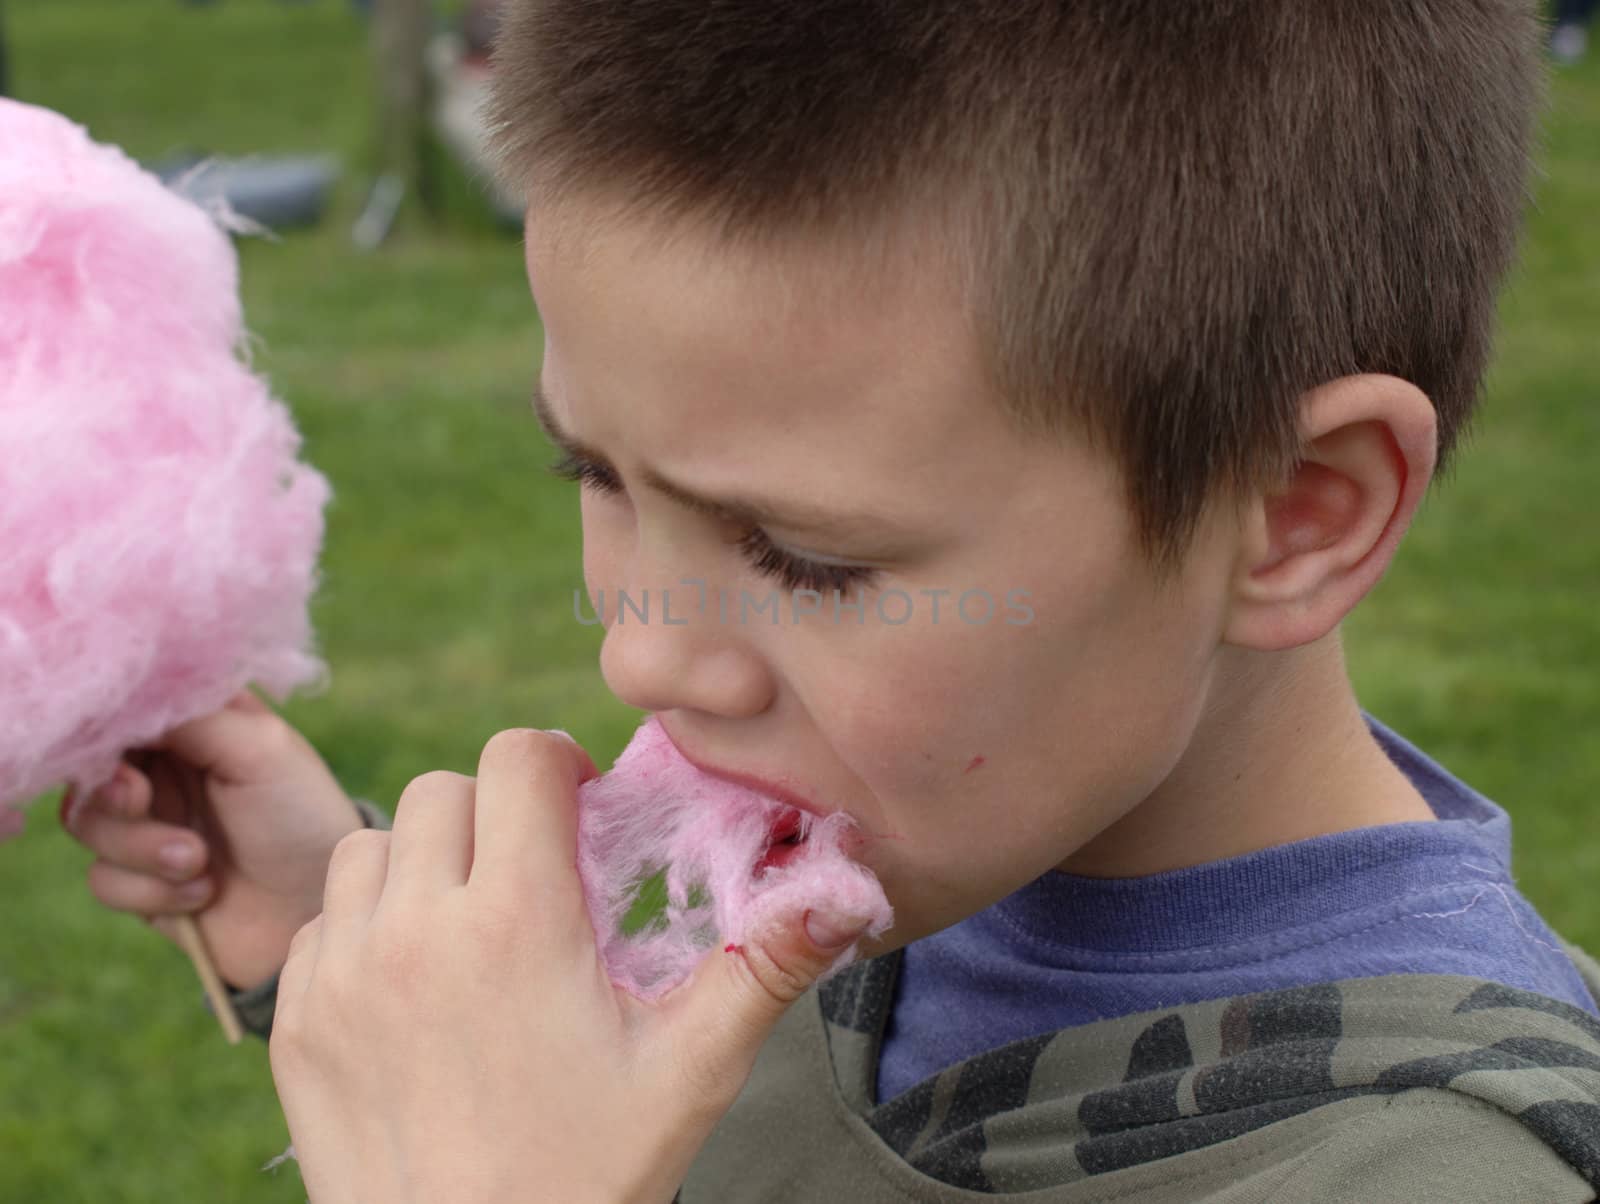 the boy eat the cotton candy by renales